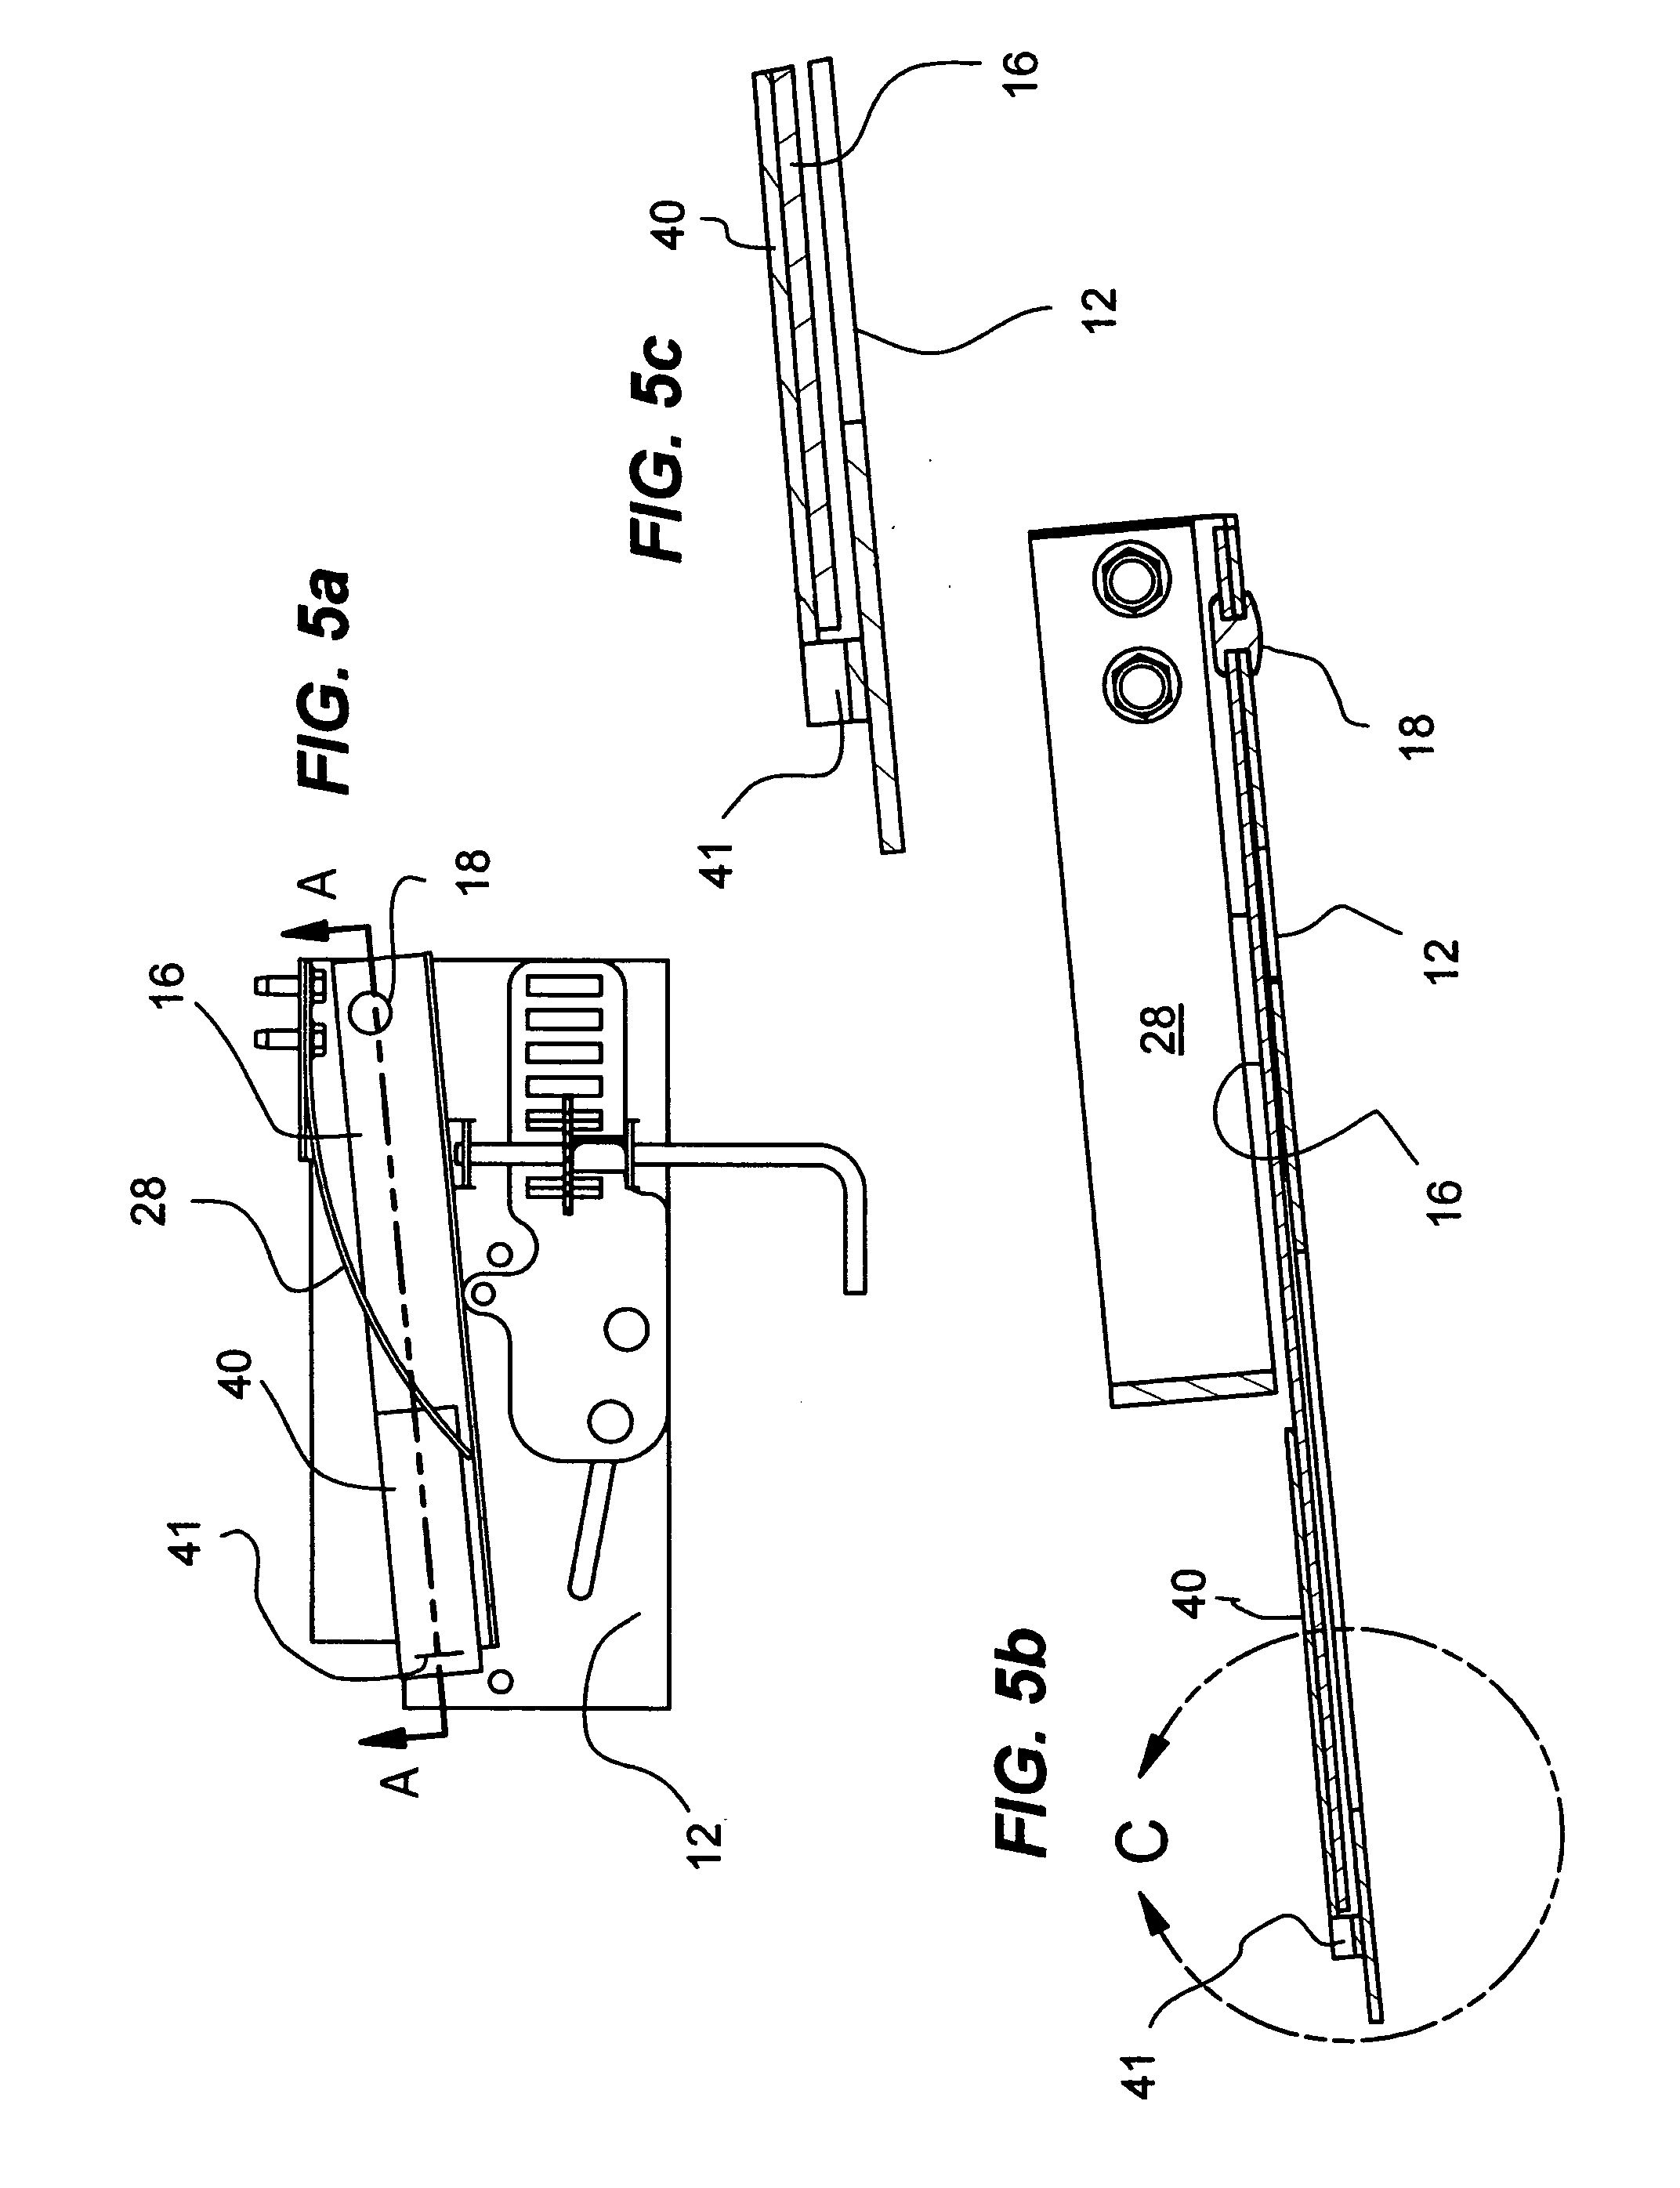 Adjustable primary air supply for wood burning device